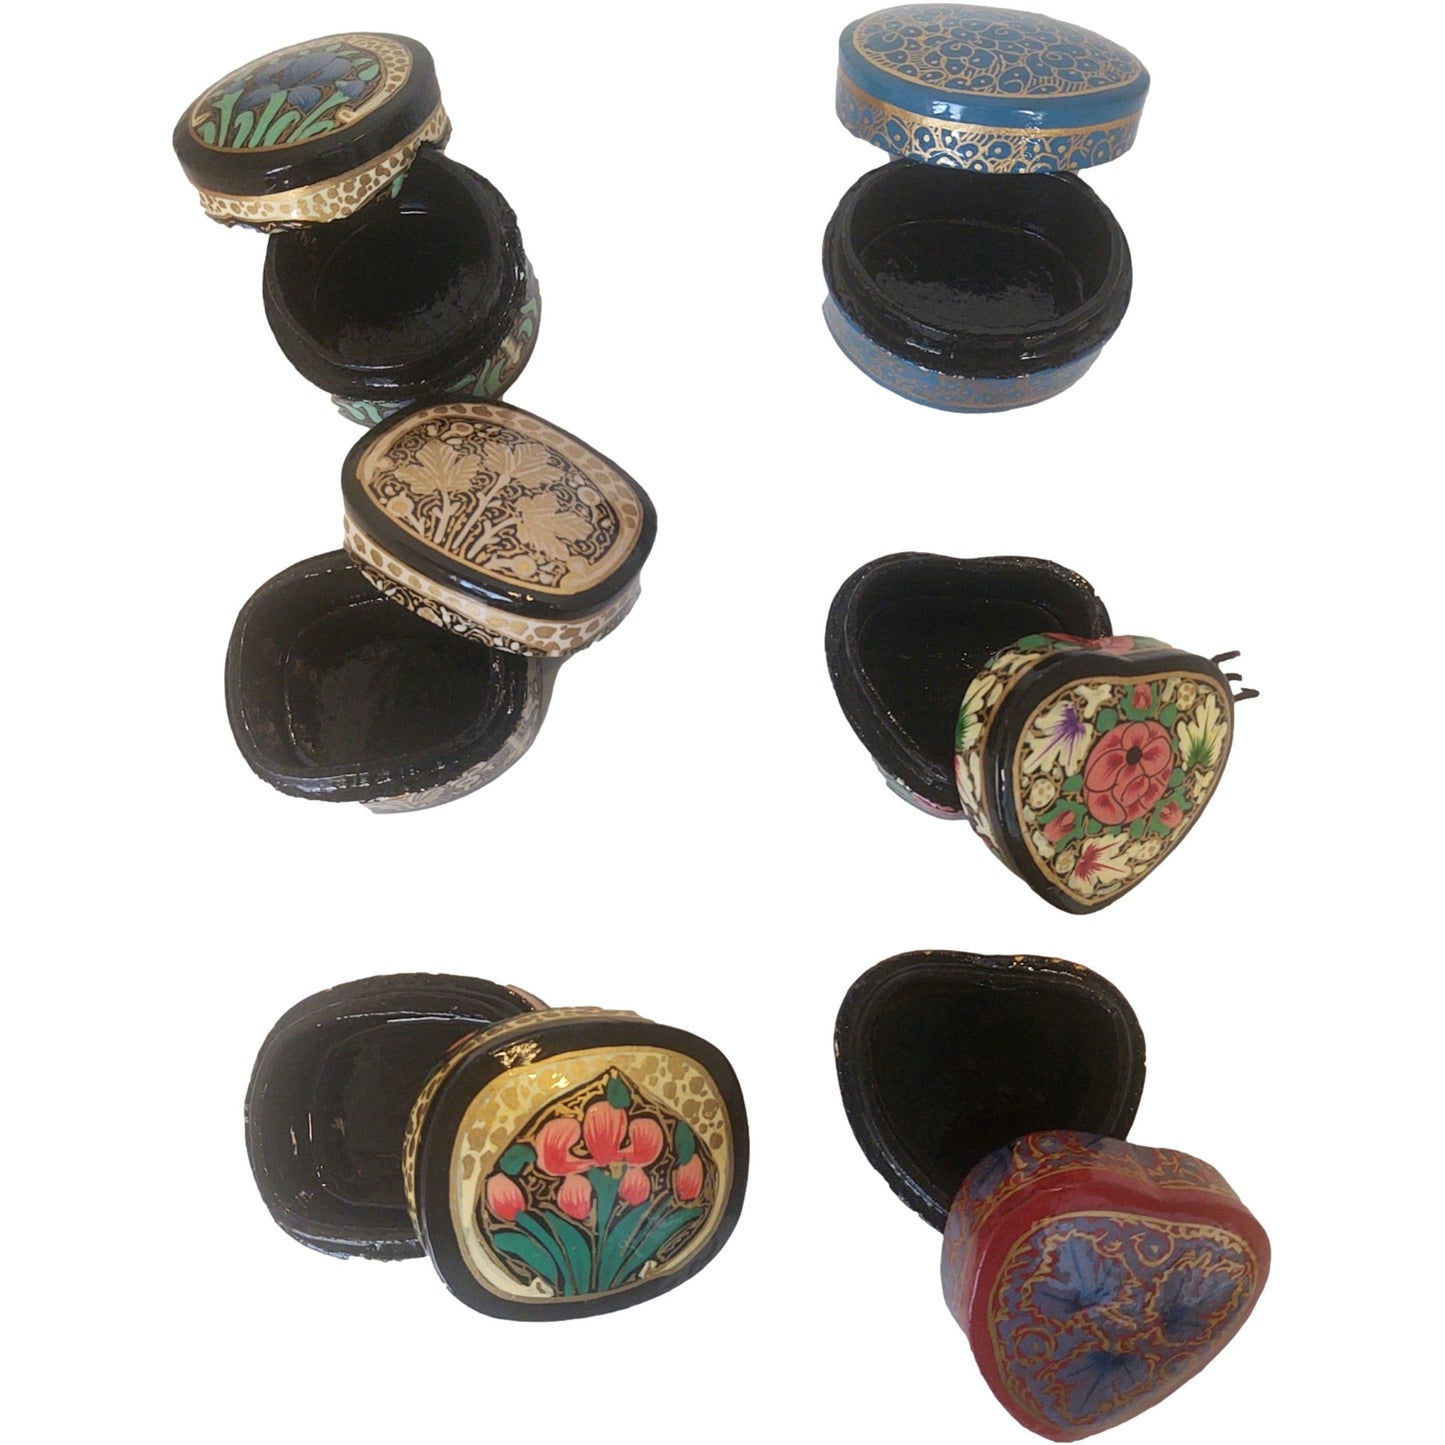 Hand Painted Paper Mache' Boxes - Hand Made In India